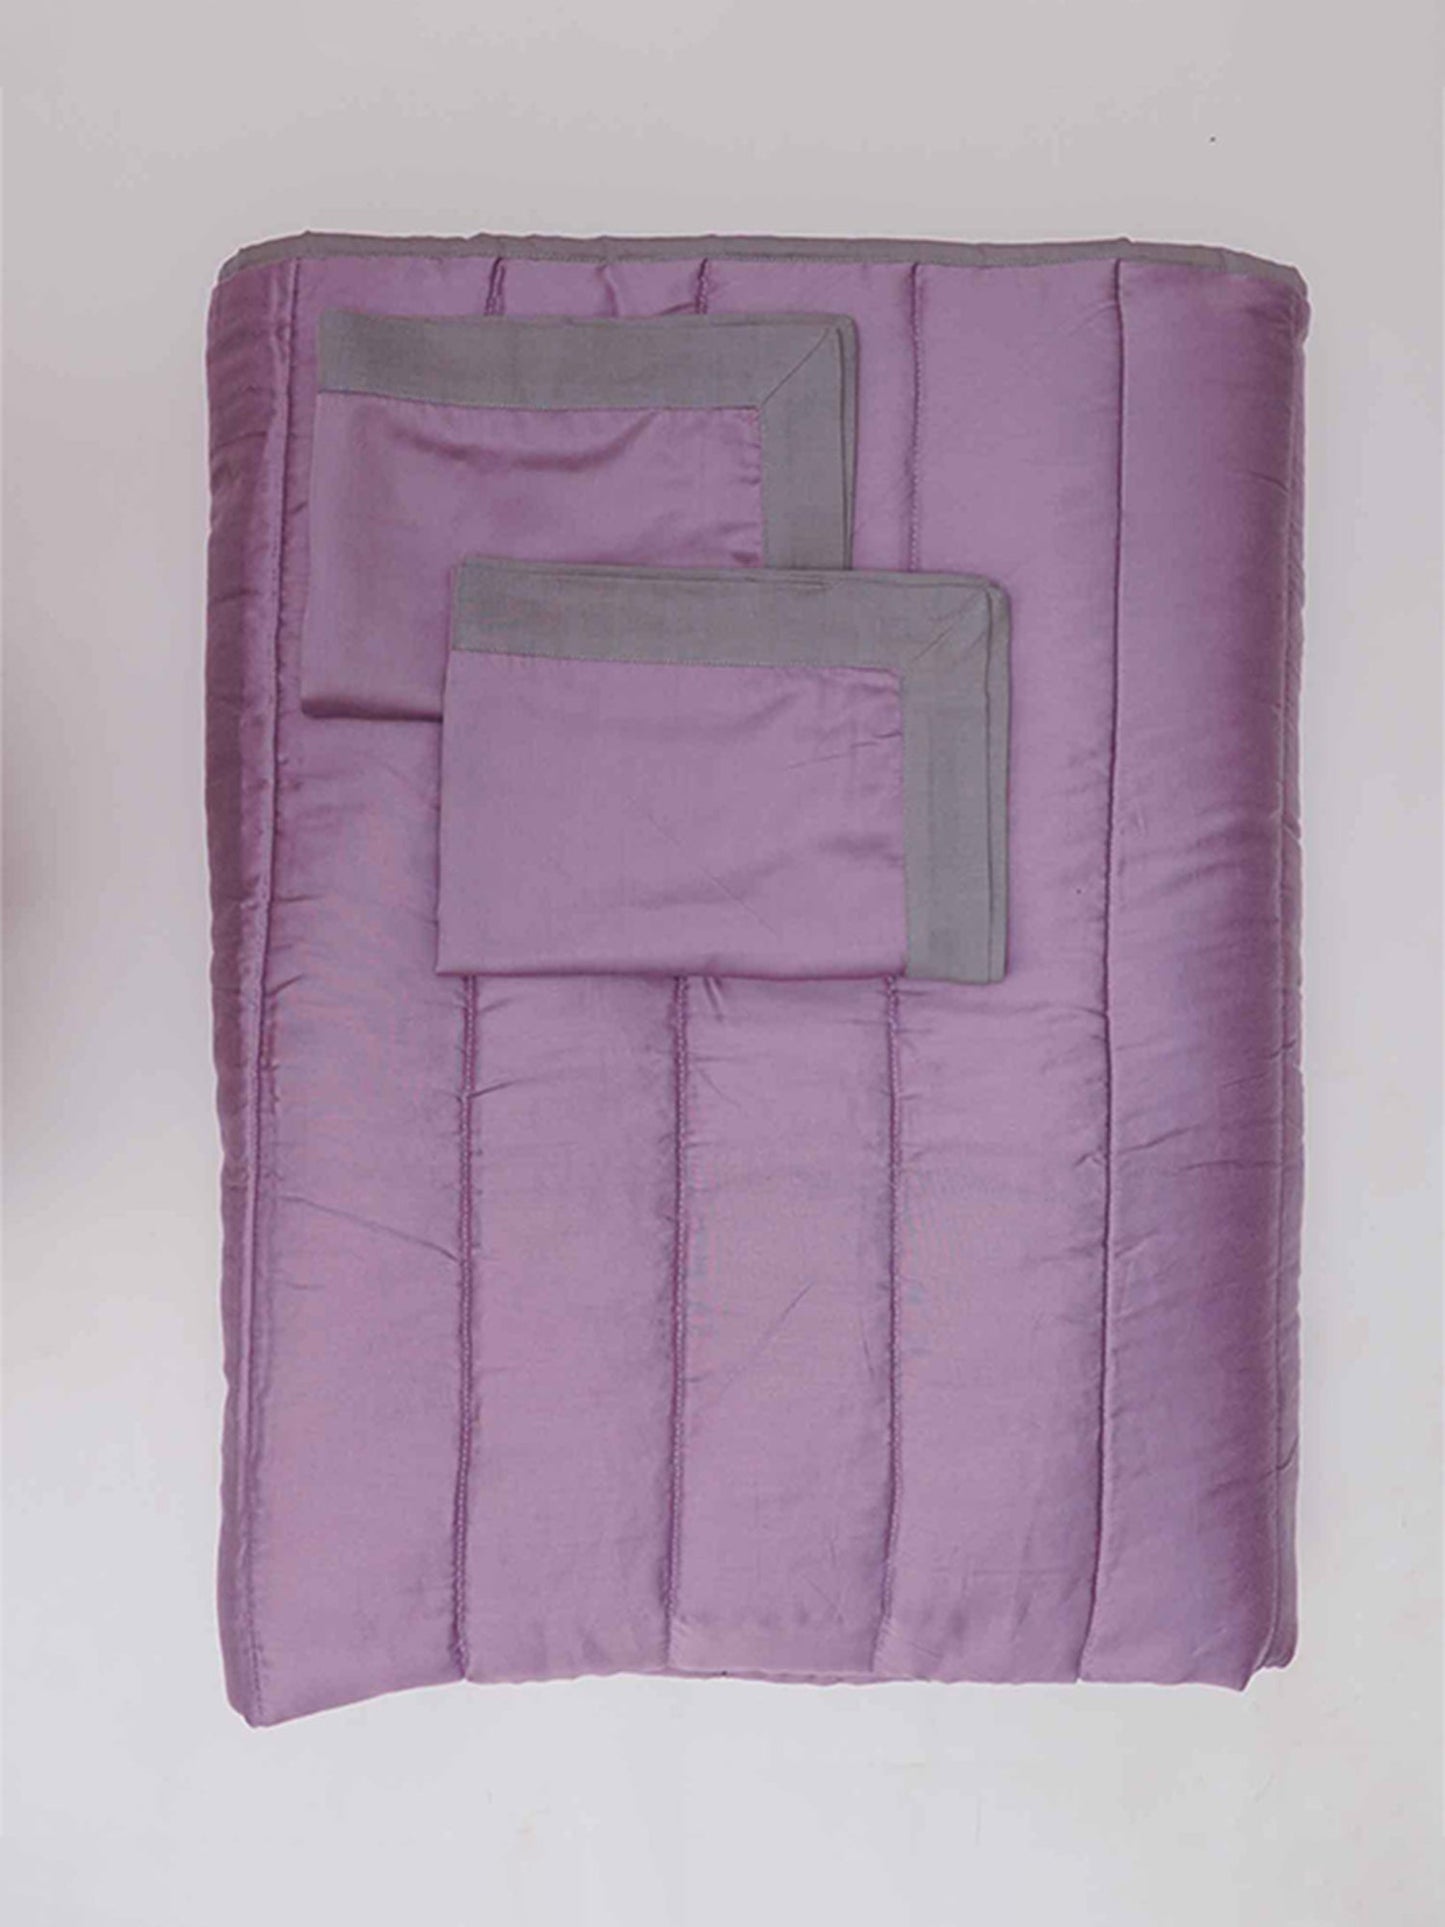 Purple colored bed quilt /comforter with 2 matching pillow covers made from polyester front and cotton backed quilt for king size double bed 